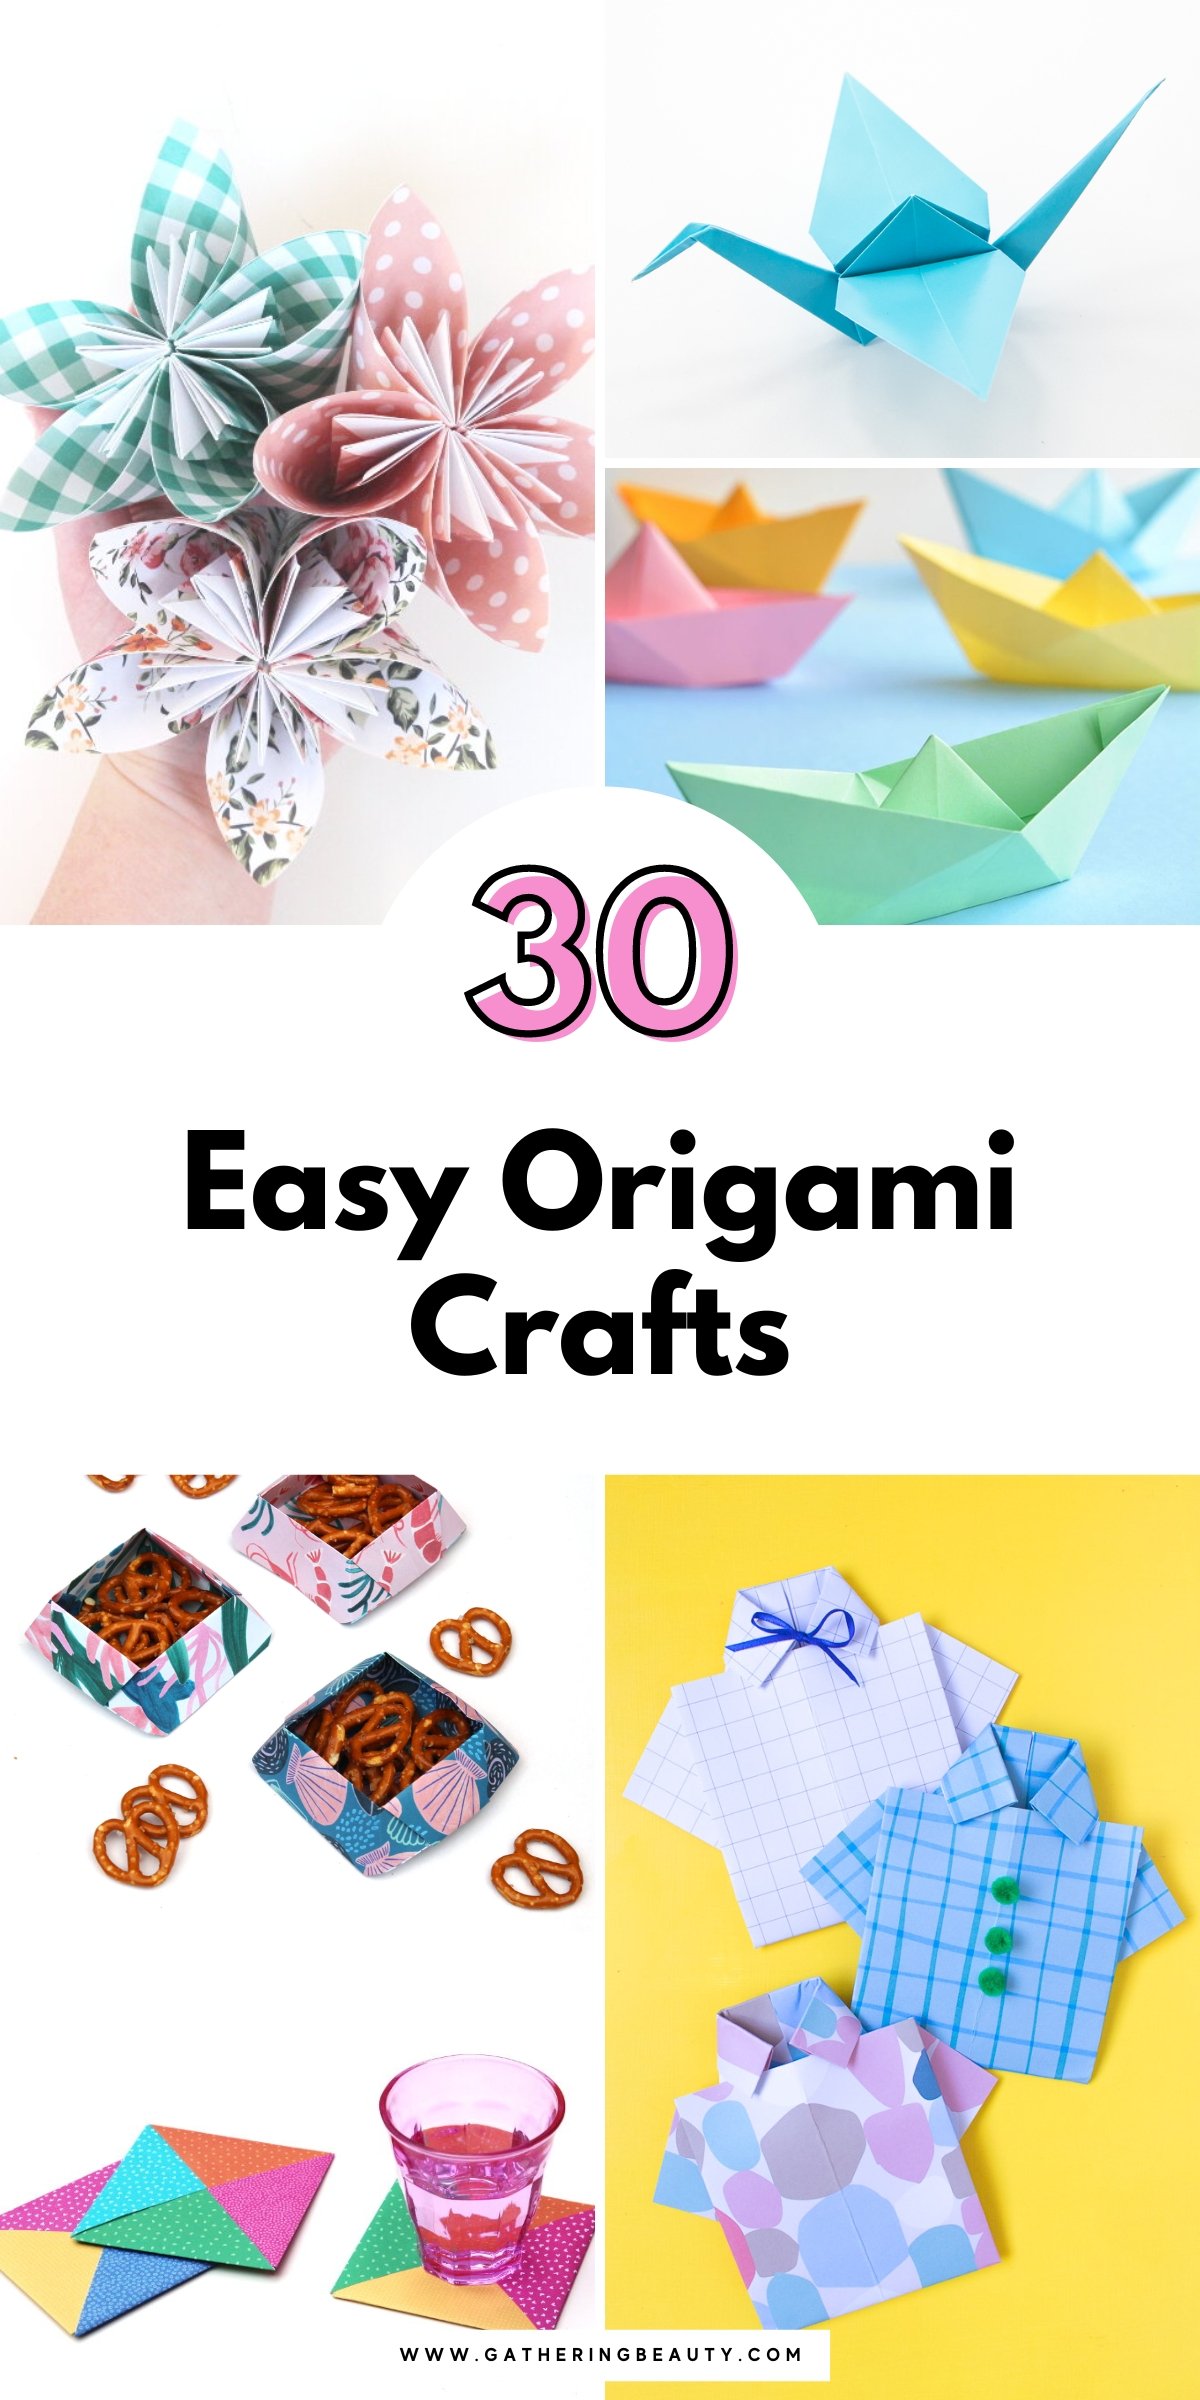 Easy origami crafts â gathering beauty